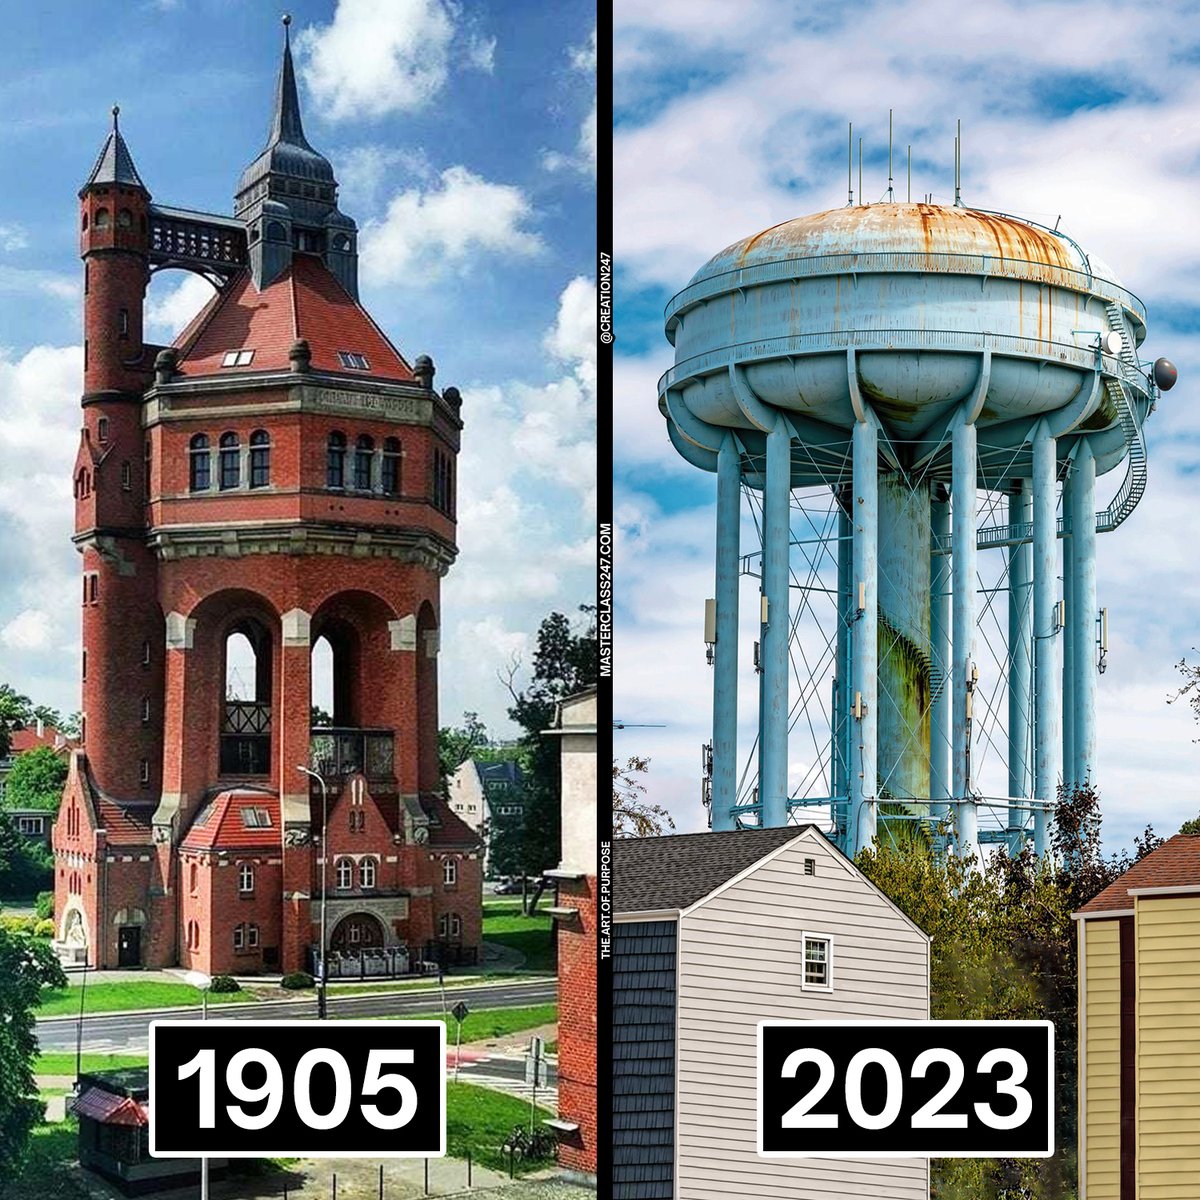 This is a reminder that we used to build water towers that looked like this... but why did we stop?